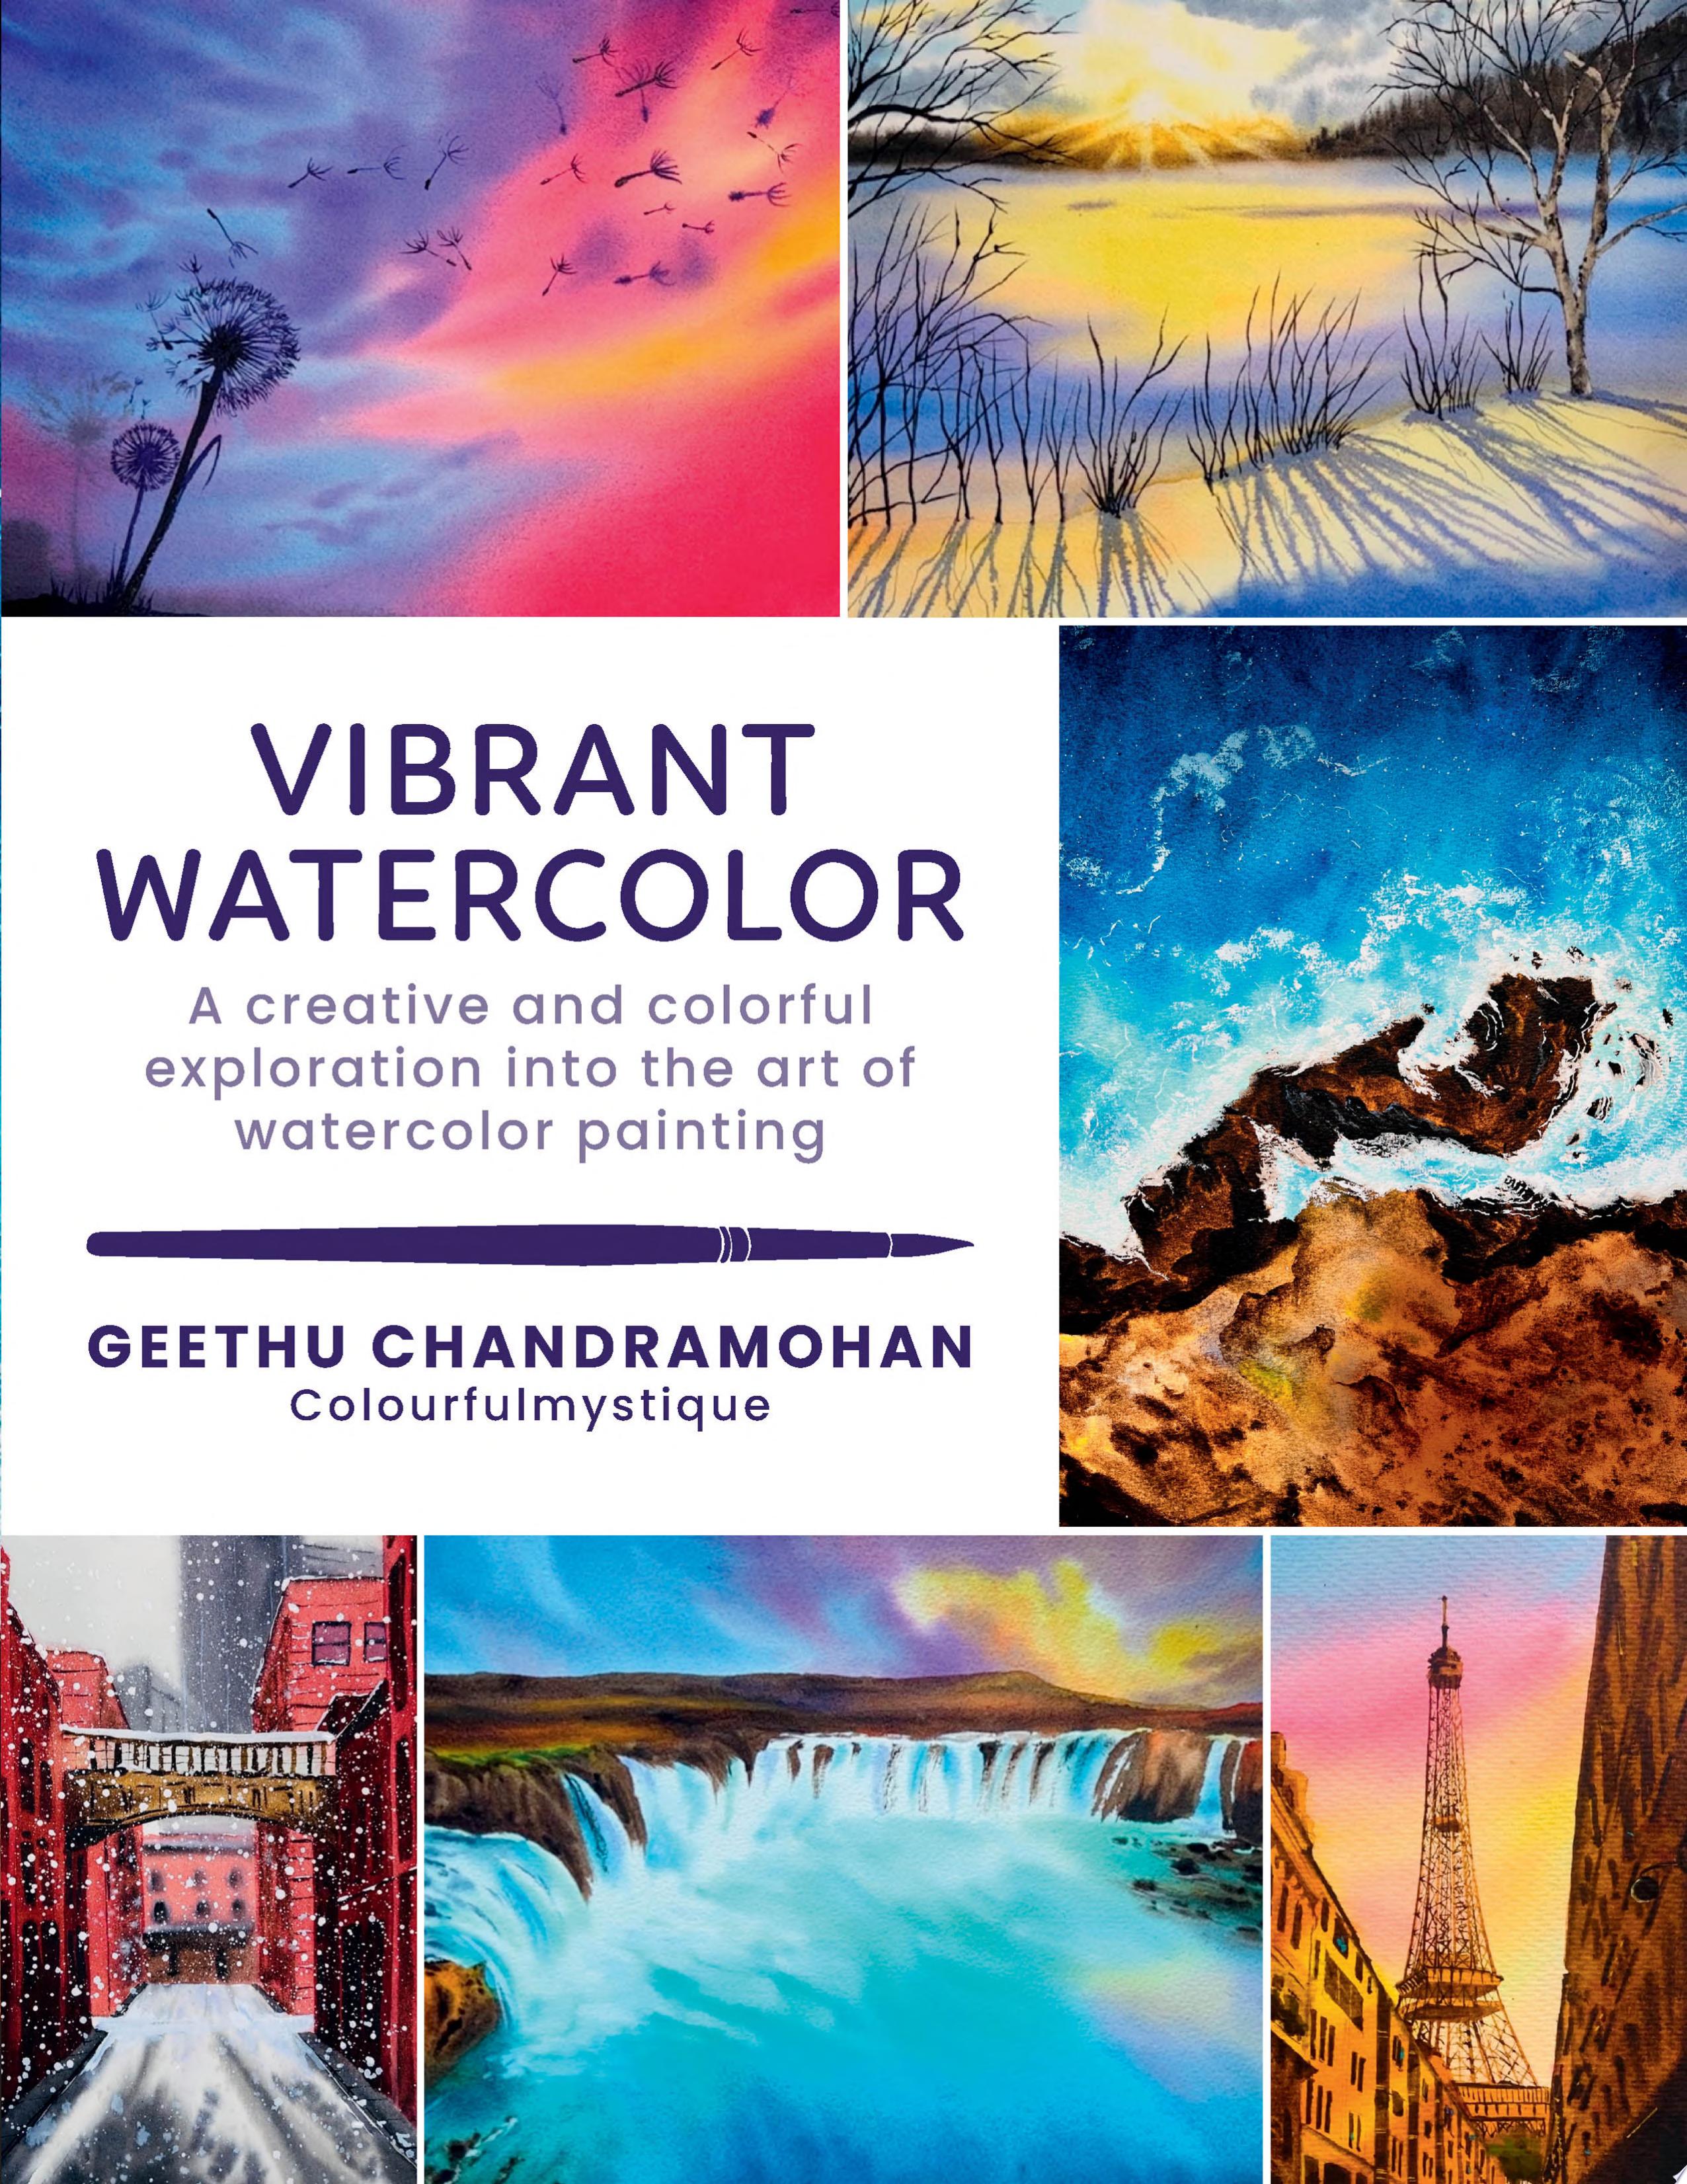 Image for "Vibrant Watercolor"